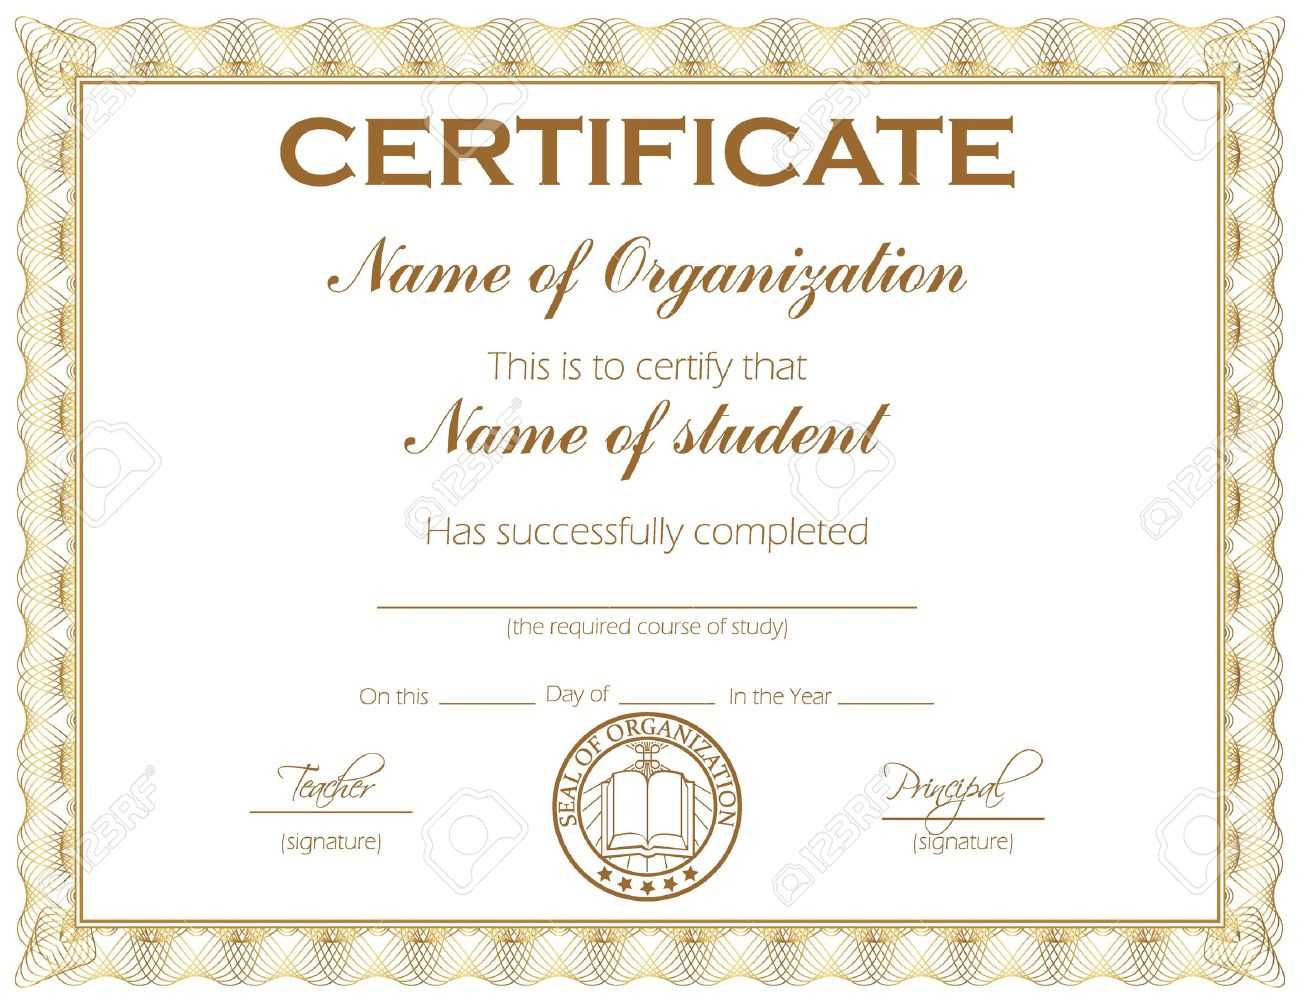 General Purpose Certificate Or Award With Sample Text That Can.. With Sales Certificate Template